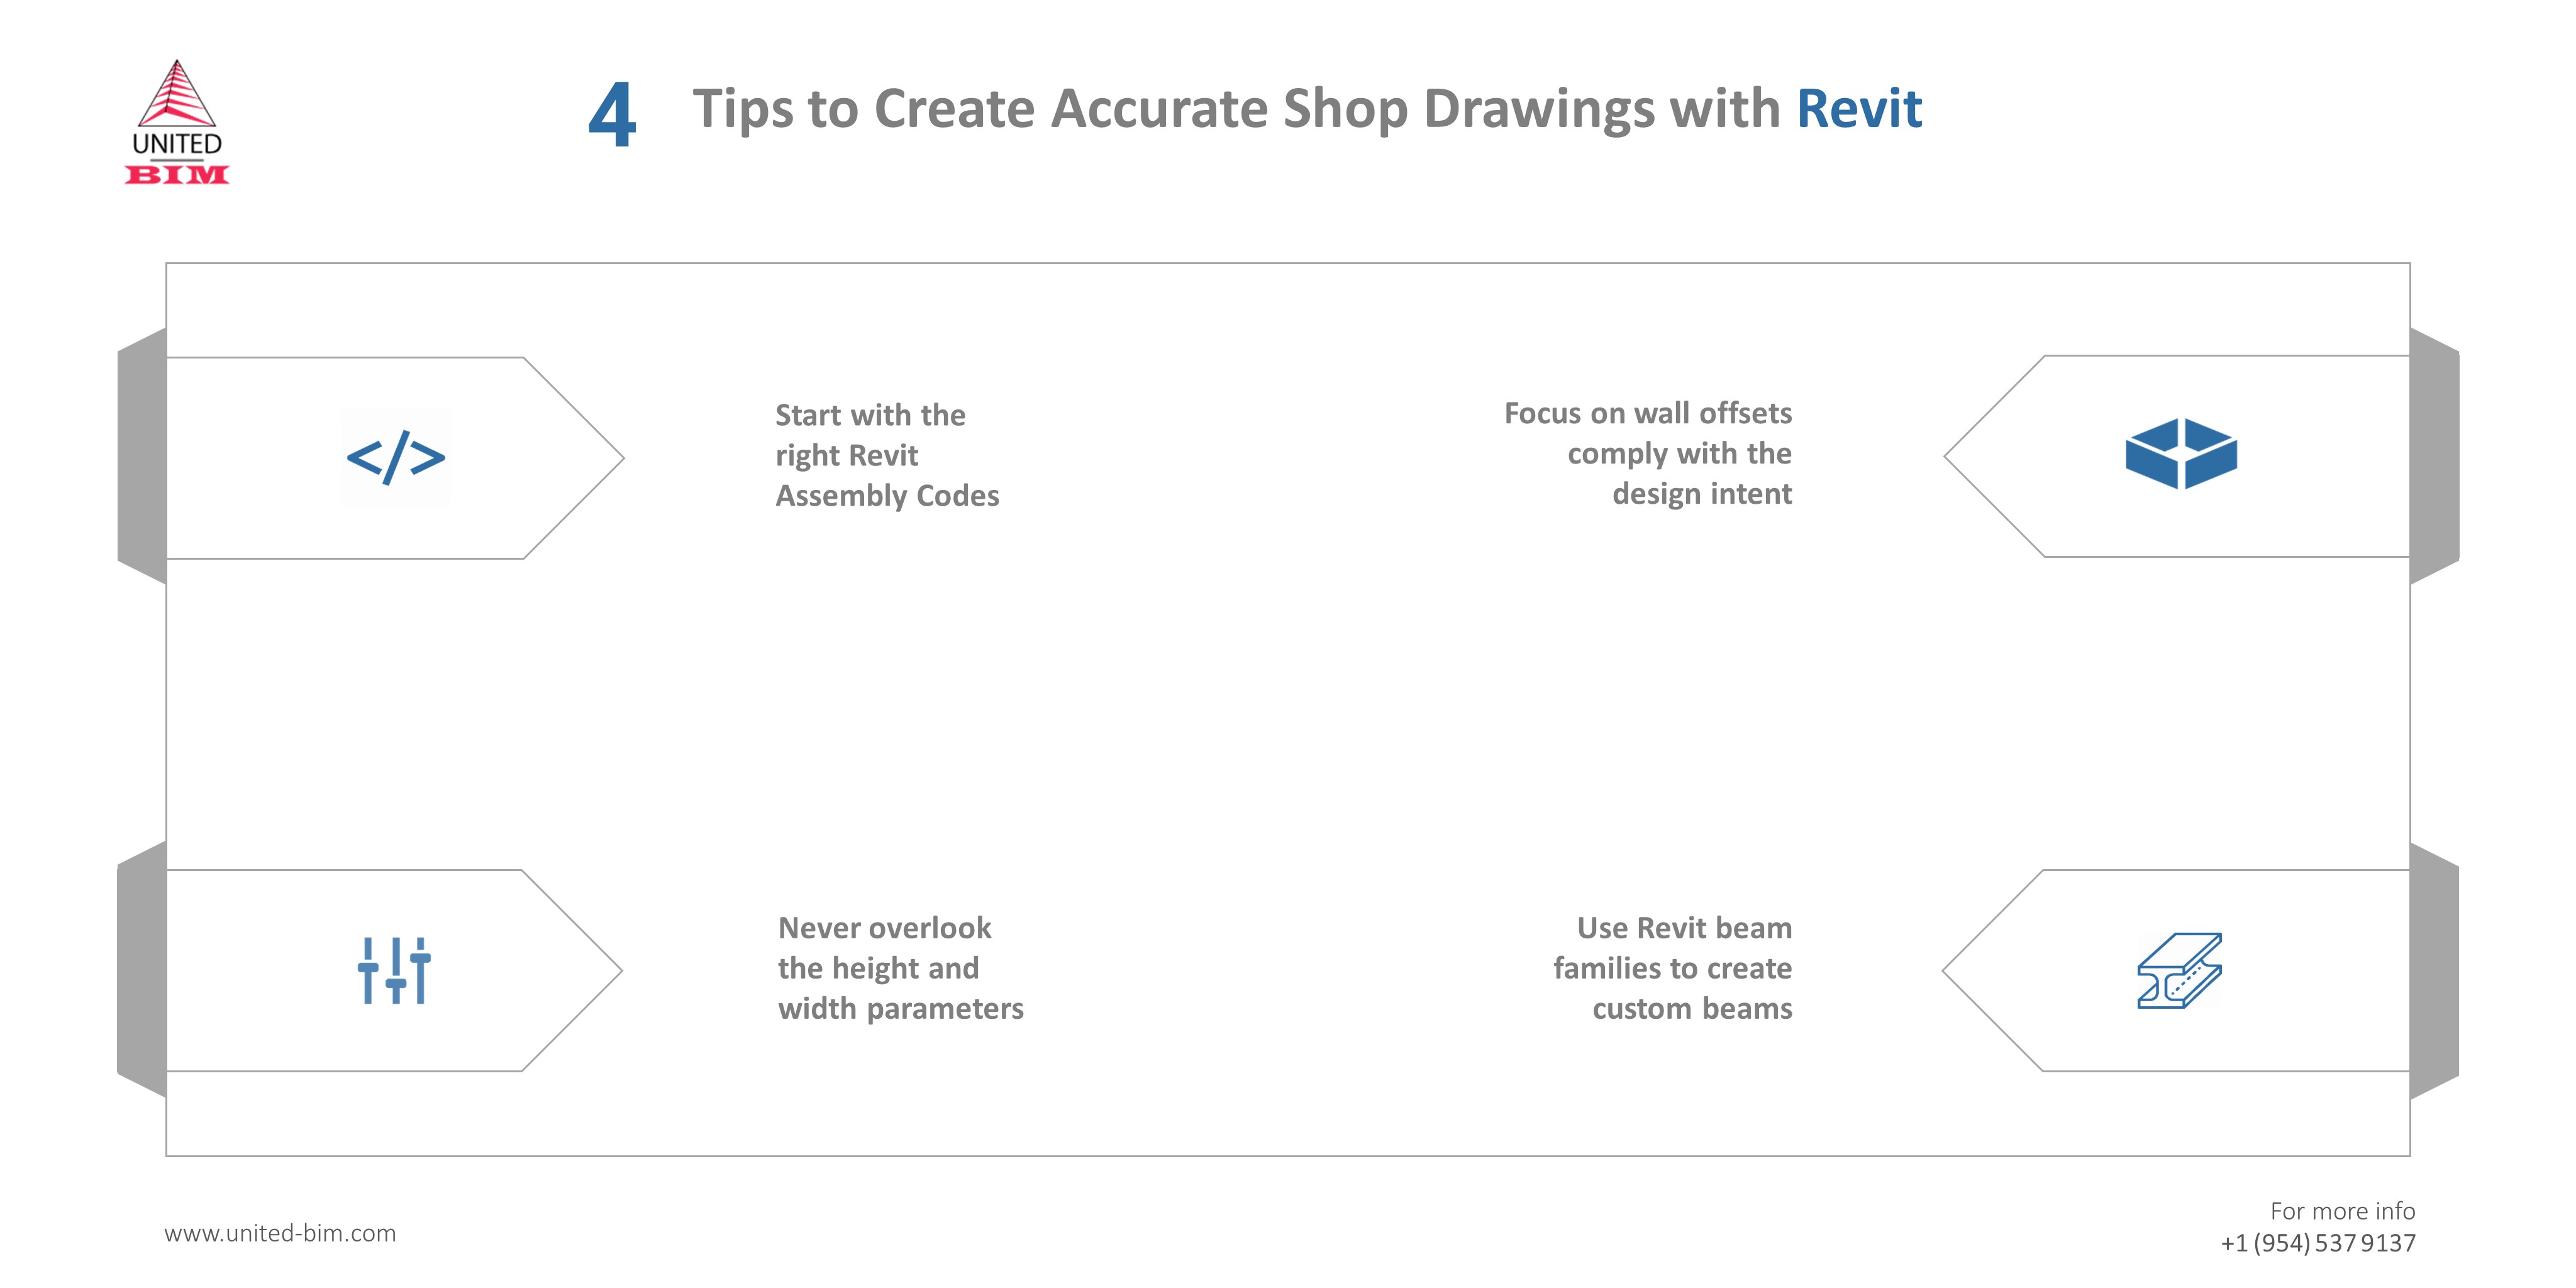 4 Useful Tips to Create Accurate Shop Drawings with Revit by United-BIM